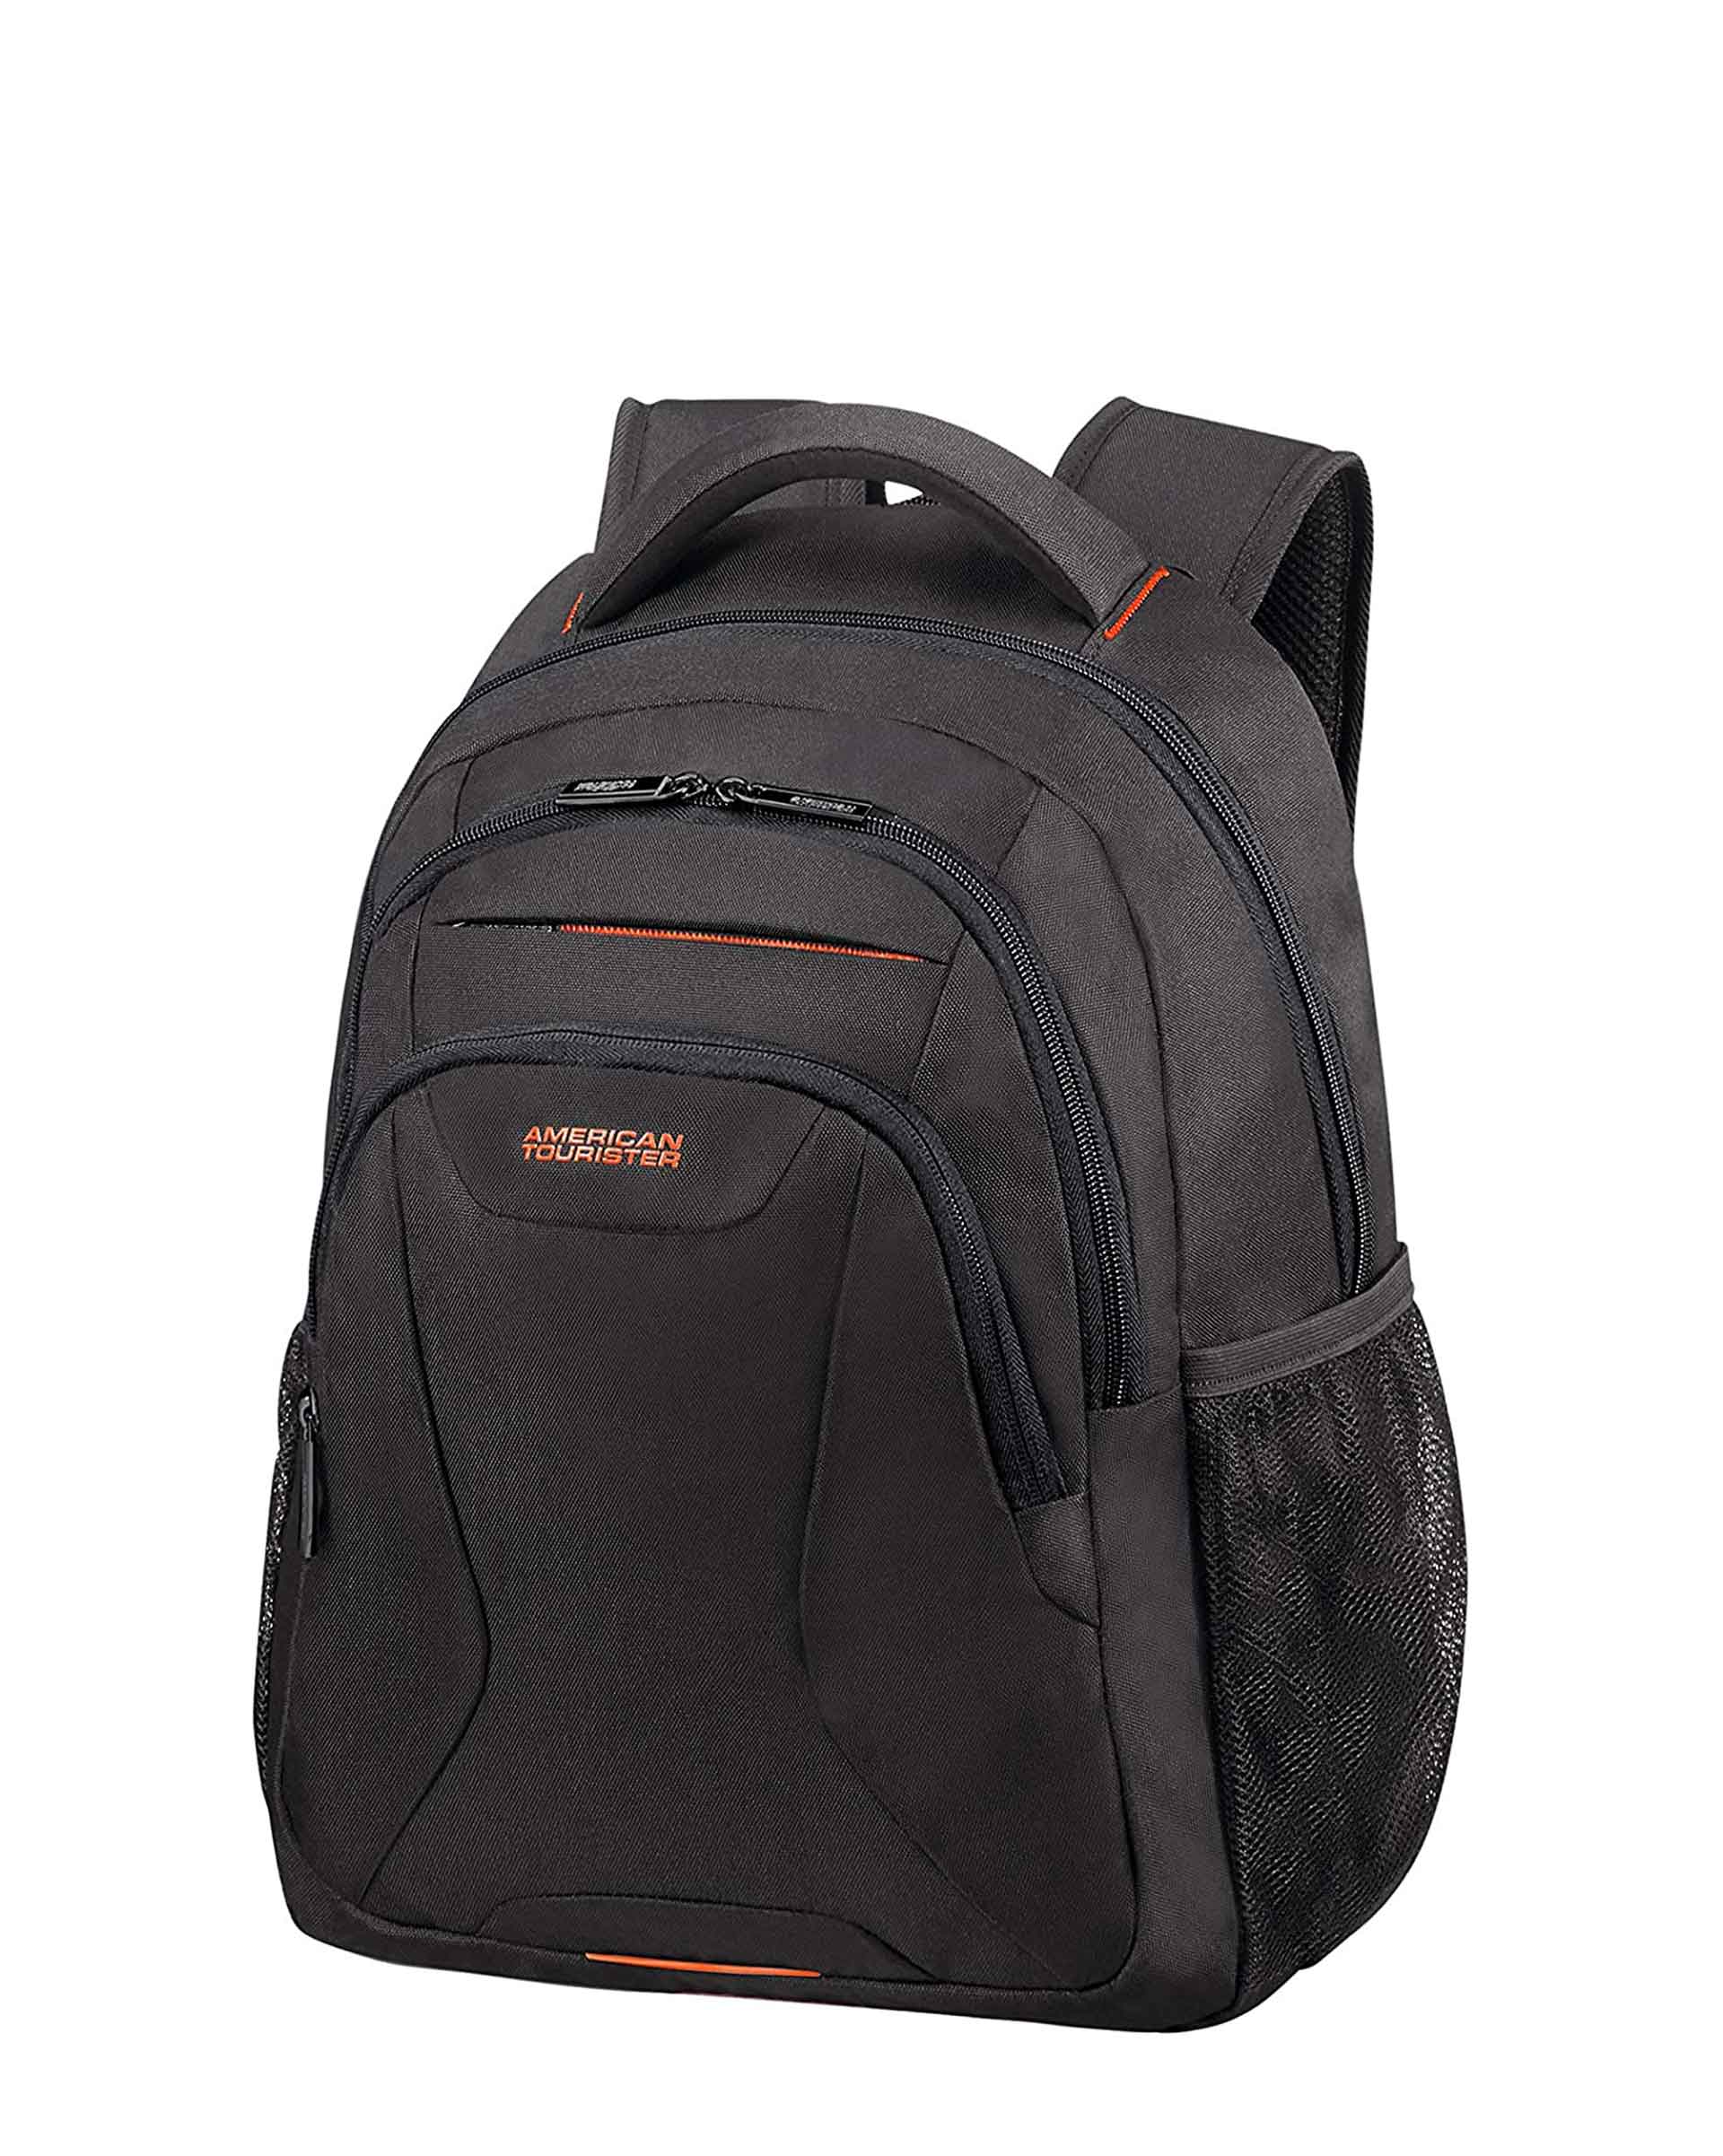 american-tourister-at-work-backpack-14.1.jpg